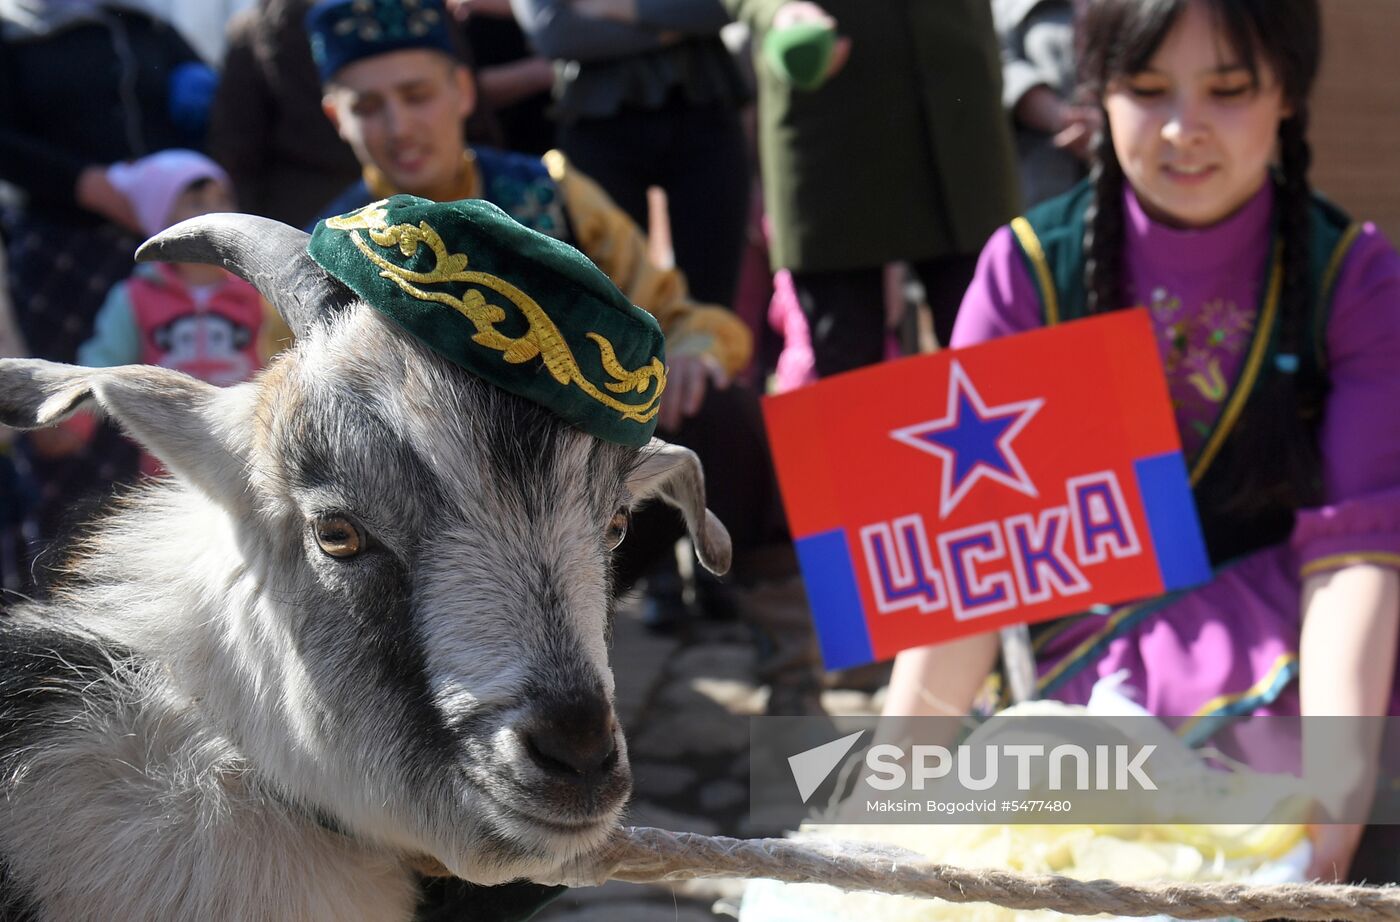 Choosing oracle goat to predict outcome of 2018 FIFA World Cup matches